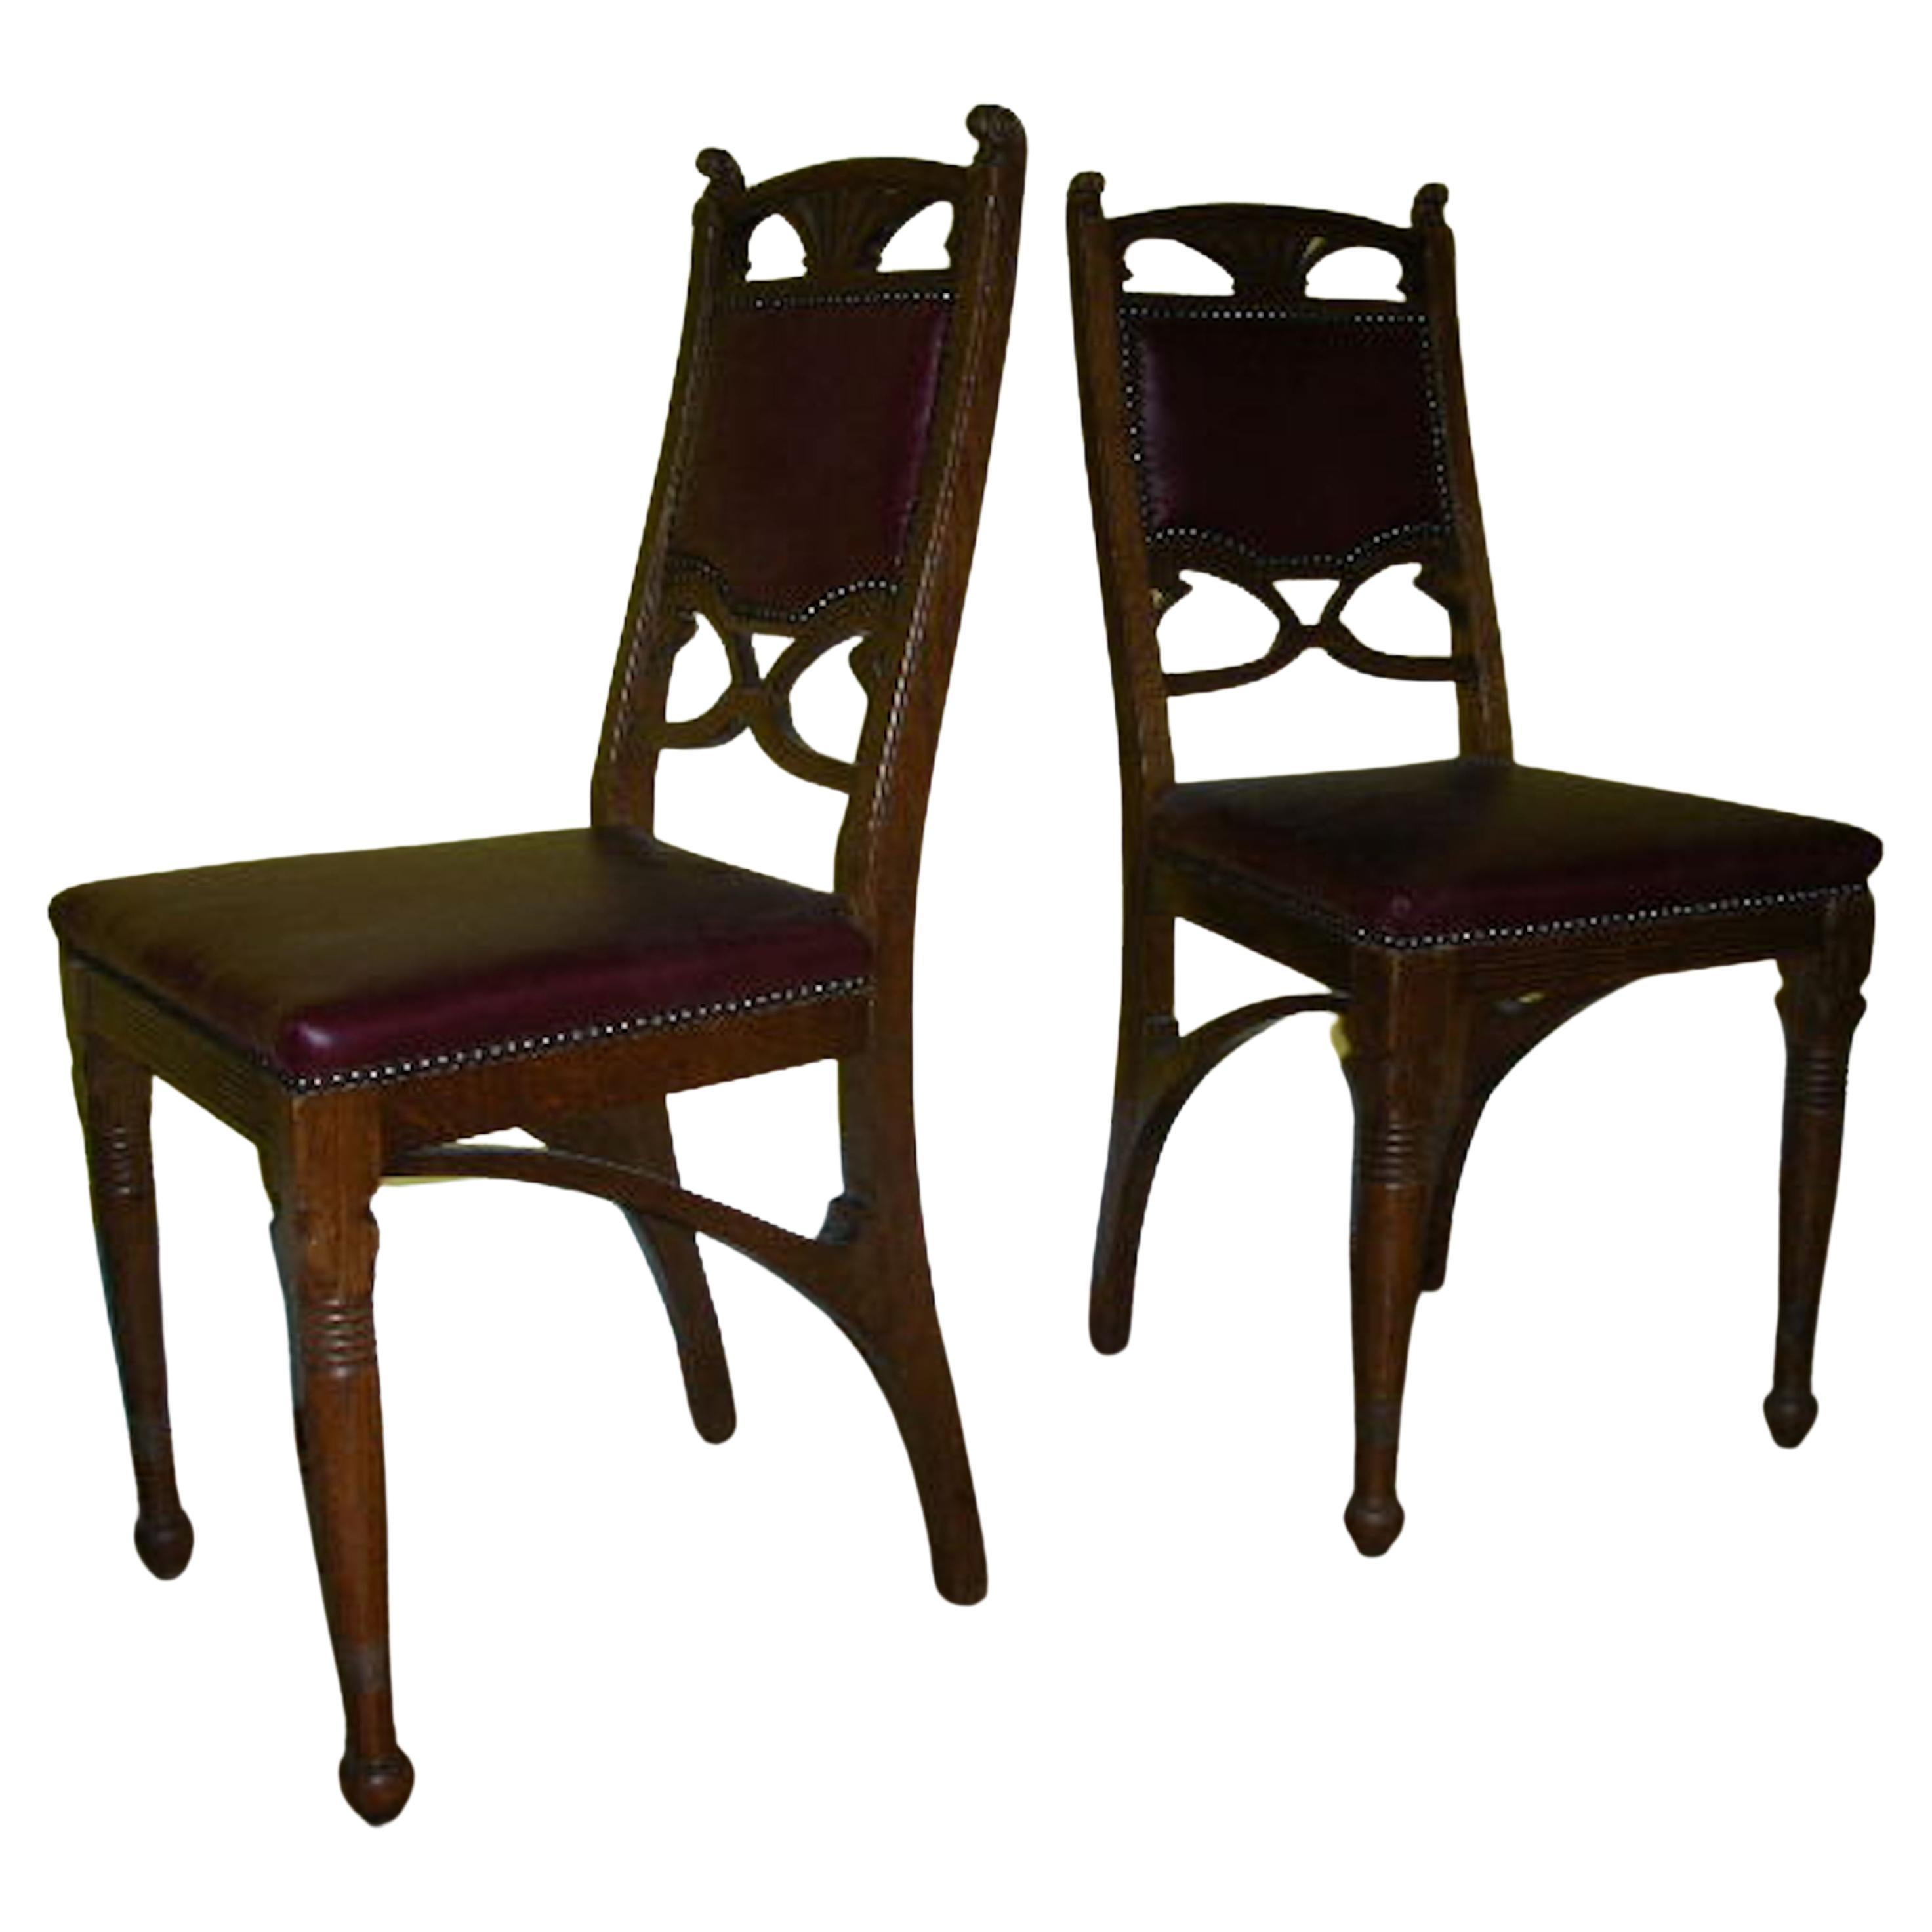 Pair of French Art Nouveau Oak Dining Chairs with Whiplash Side Stretchers